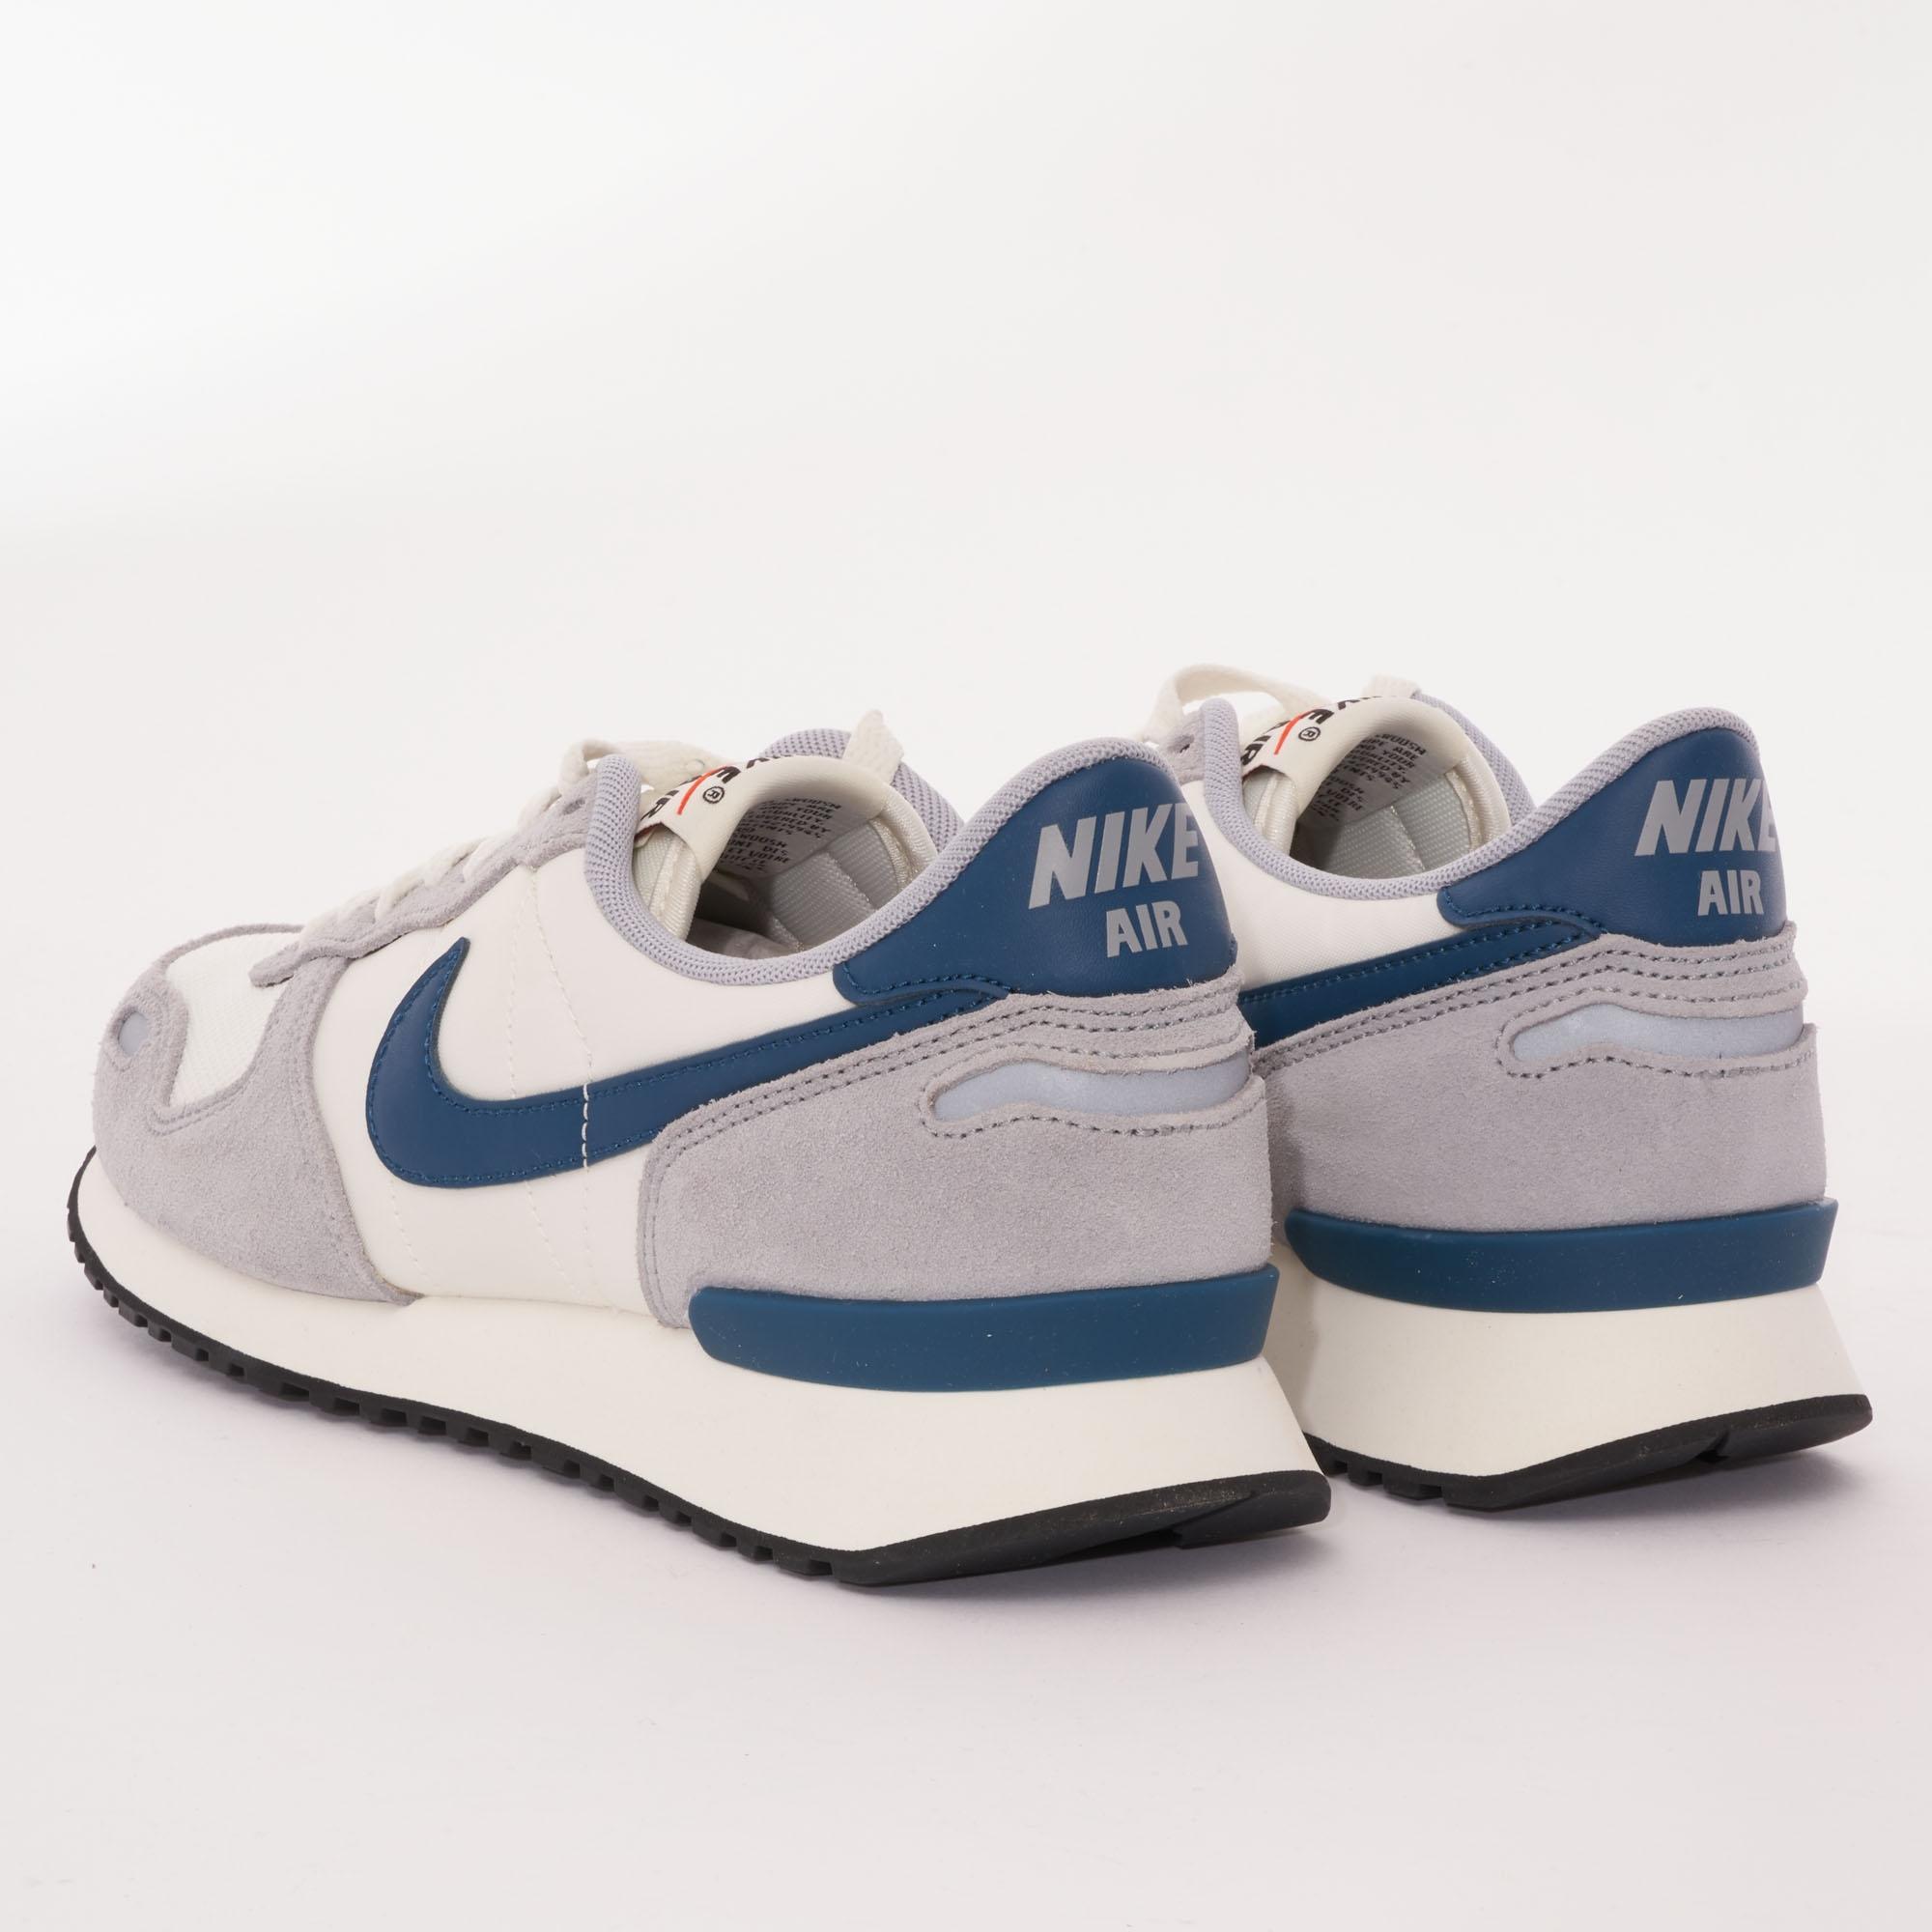 Nike Leather Air Vortex - Wolf Grey, Blue Force & Sail in Grey for Men -  Lyst